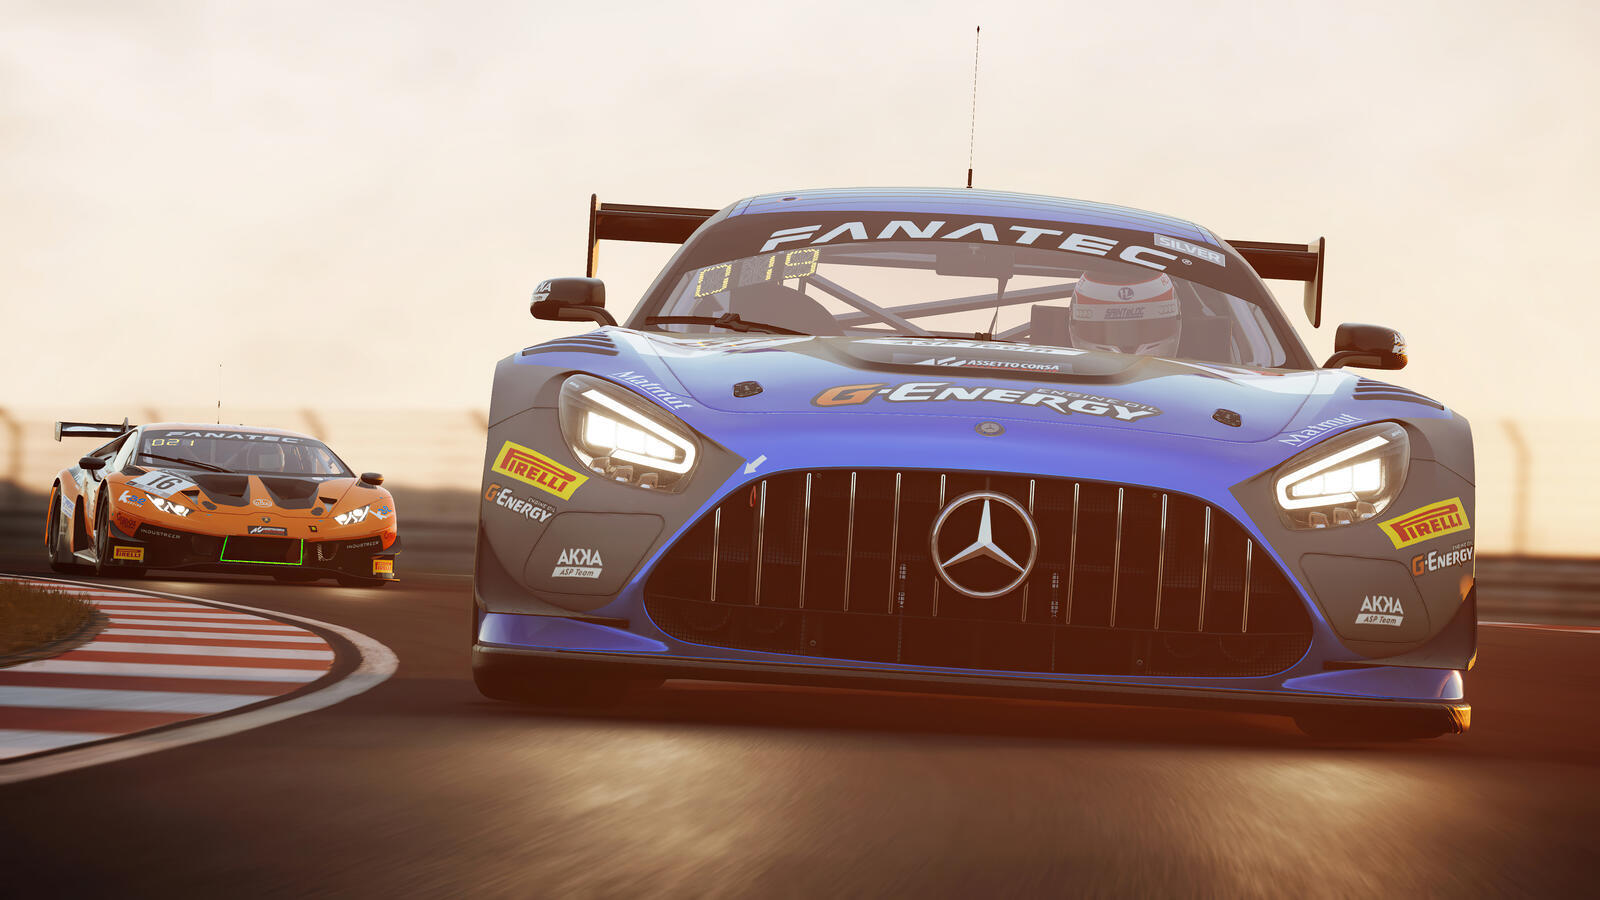 Wallpapers Assetto Corsa Competizione 2021 games games on the desktop